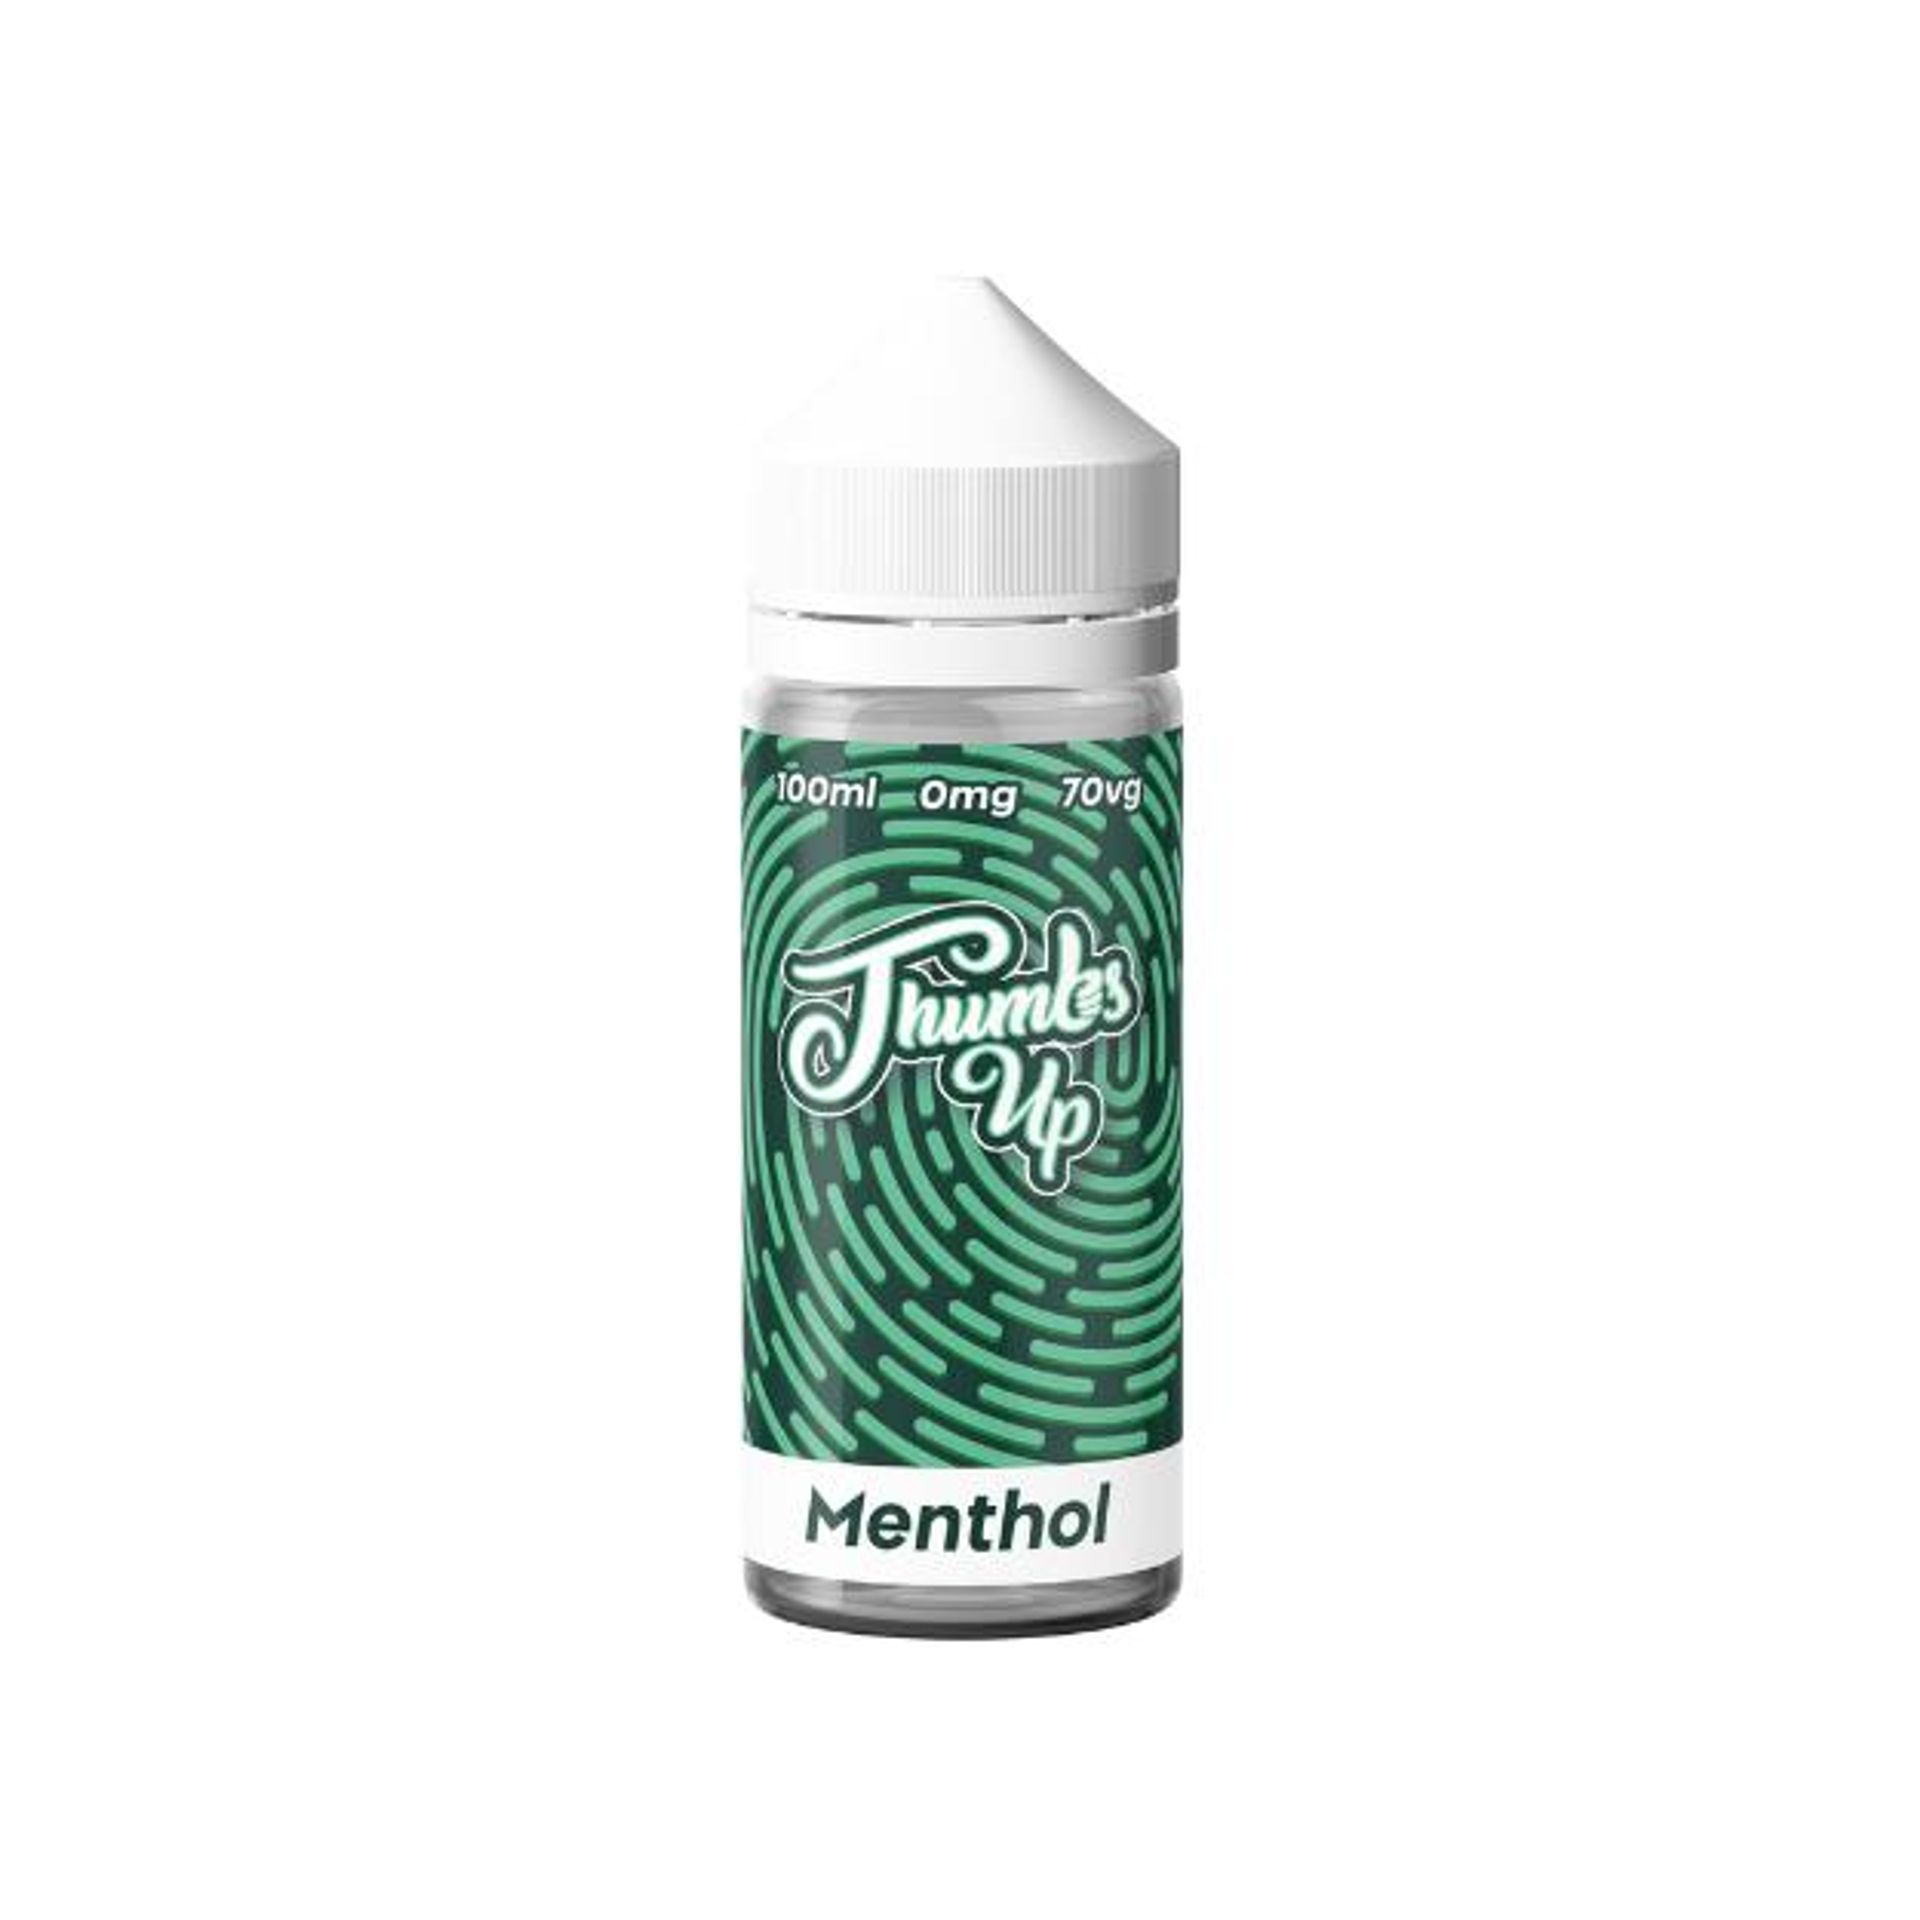 Image of Menthol by Thumbs Up